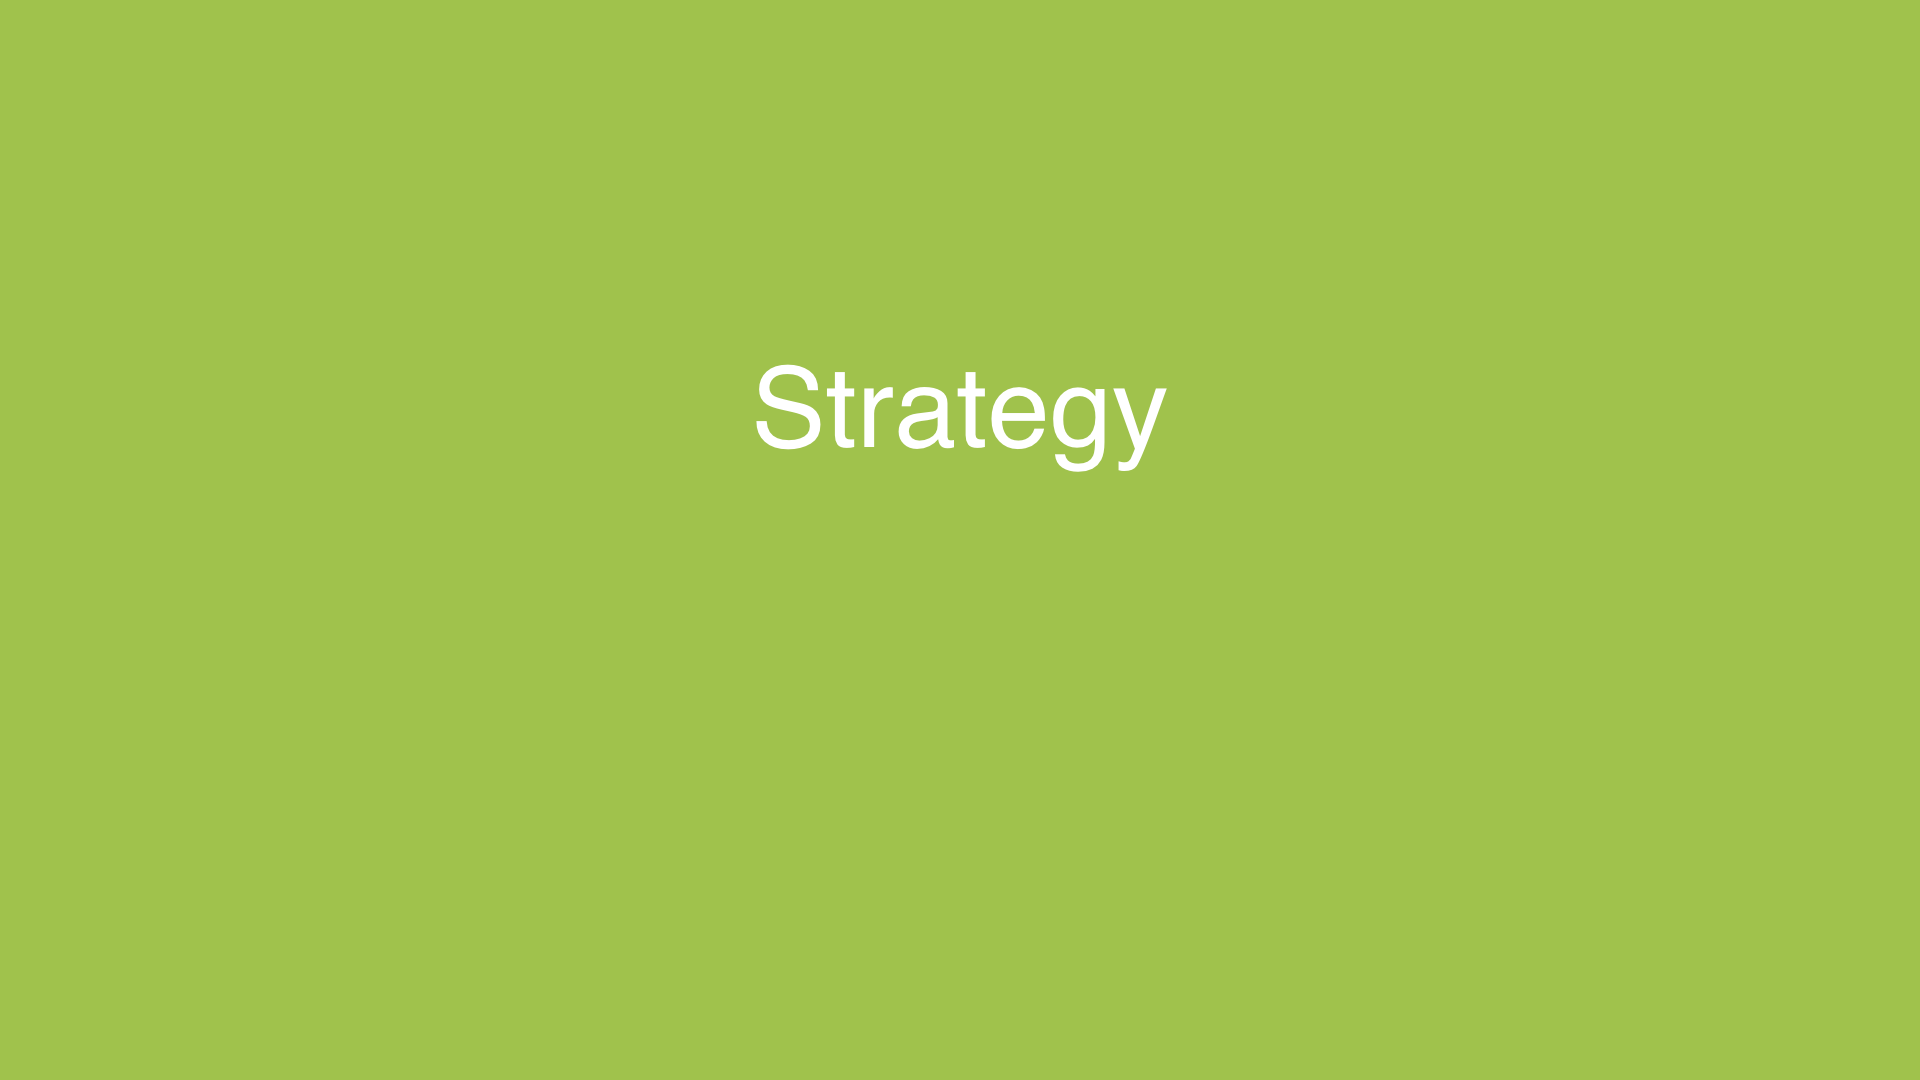 Text: Strategy